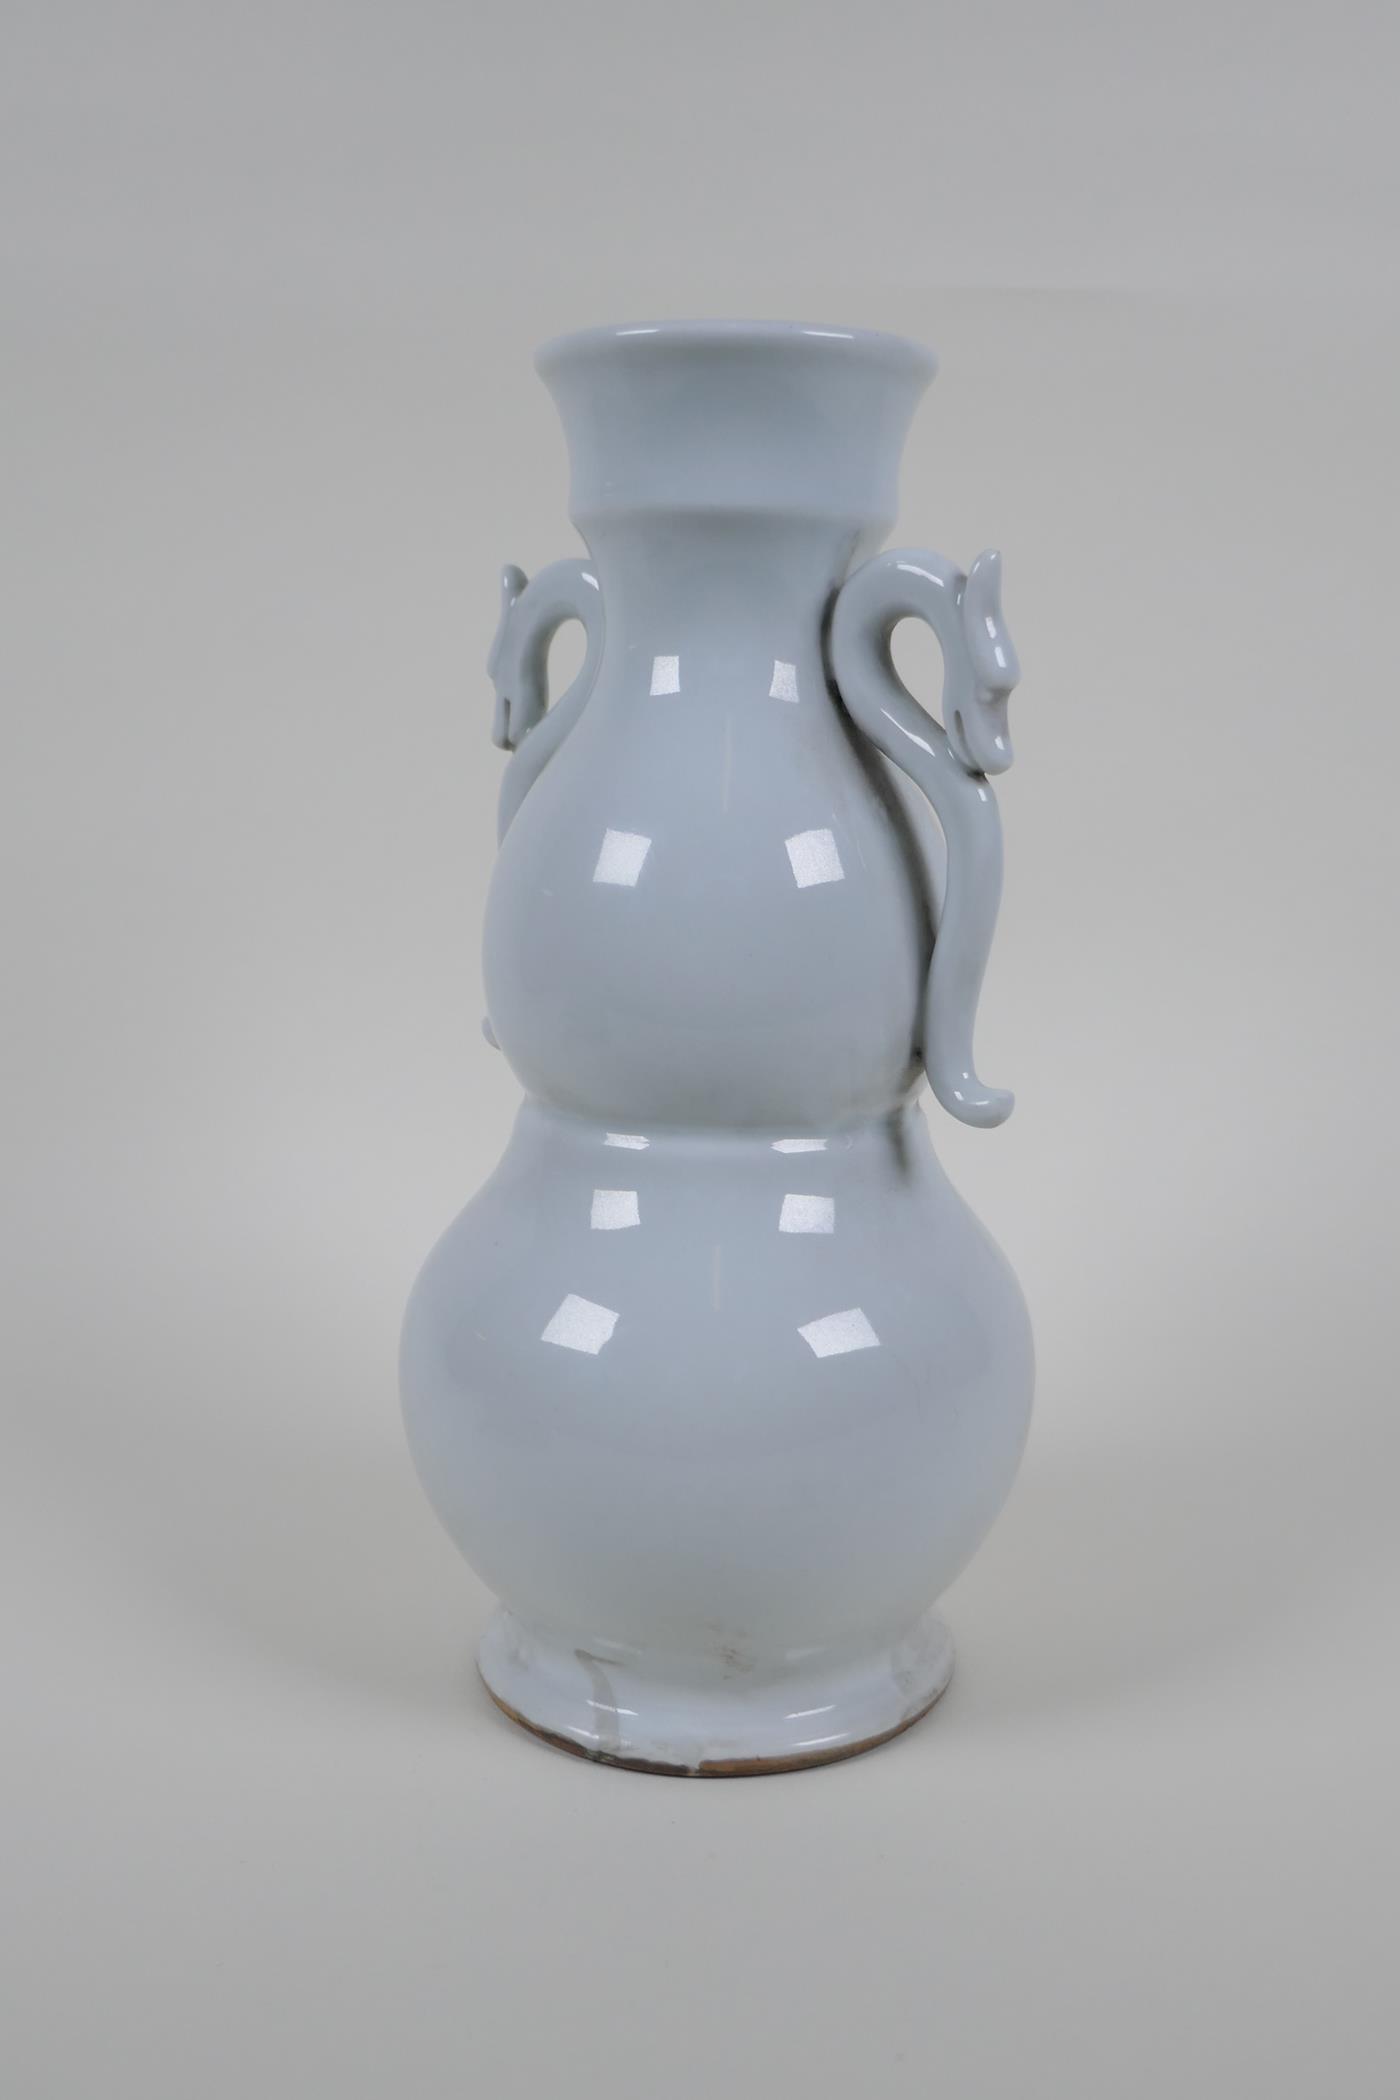 A blanc de chine porcelain two handled double gourd vase with raised prunus blossom decoration, - Image 3 of 5